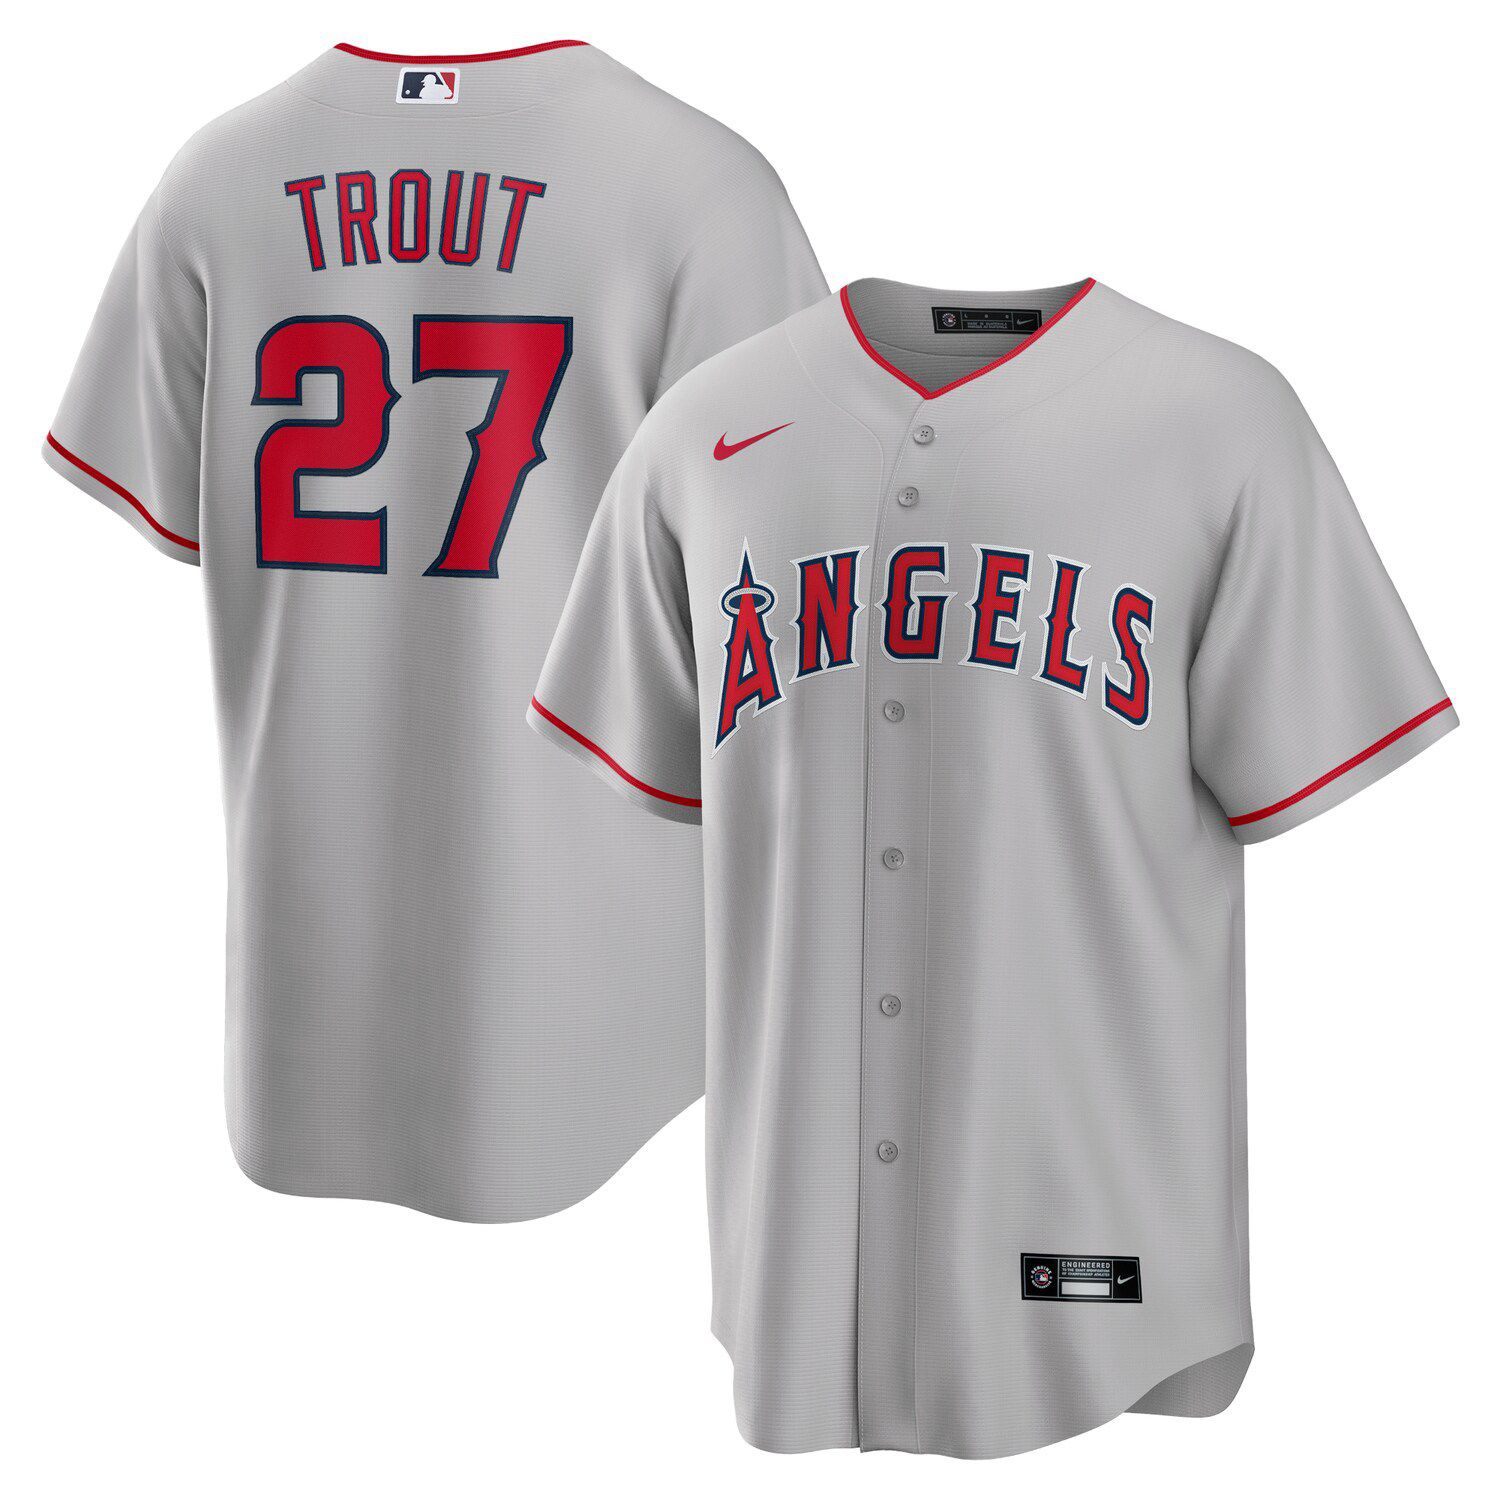 mike trout number jersey